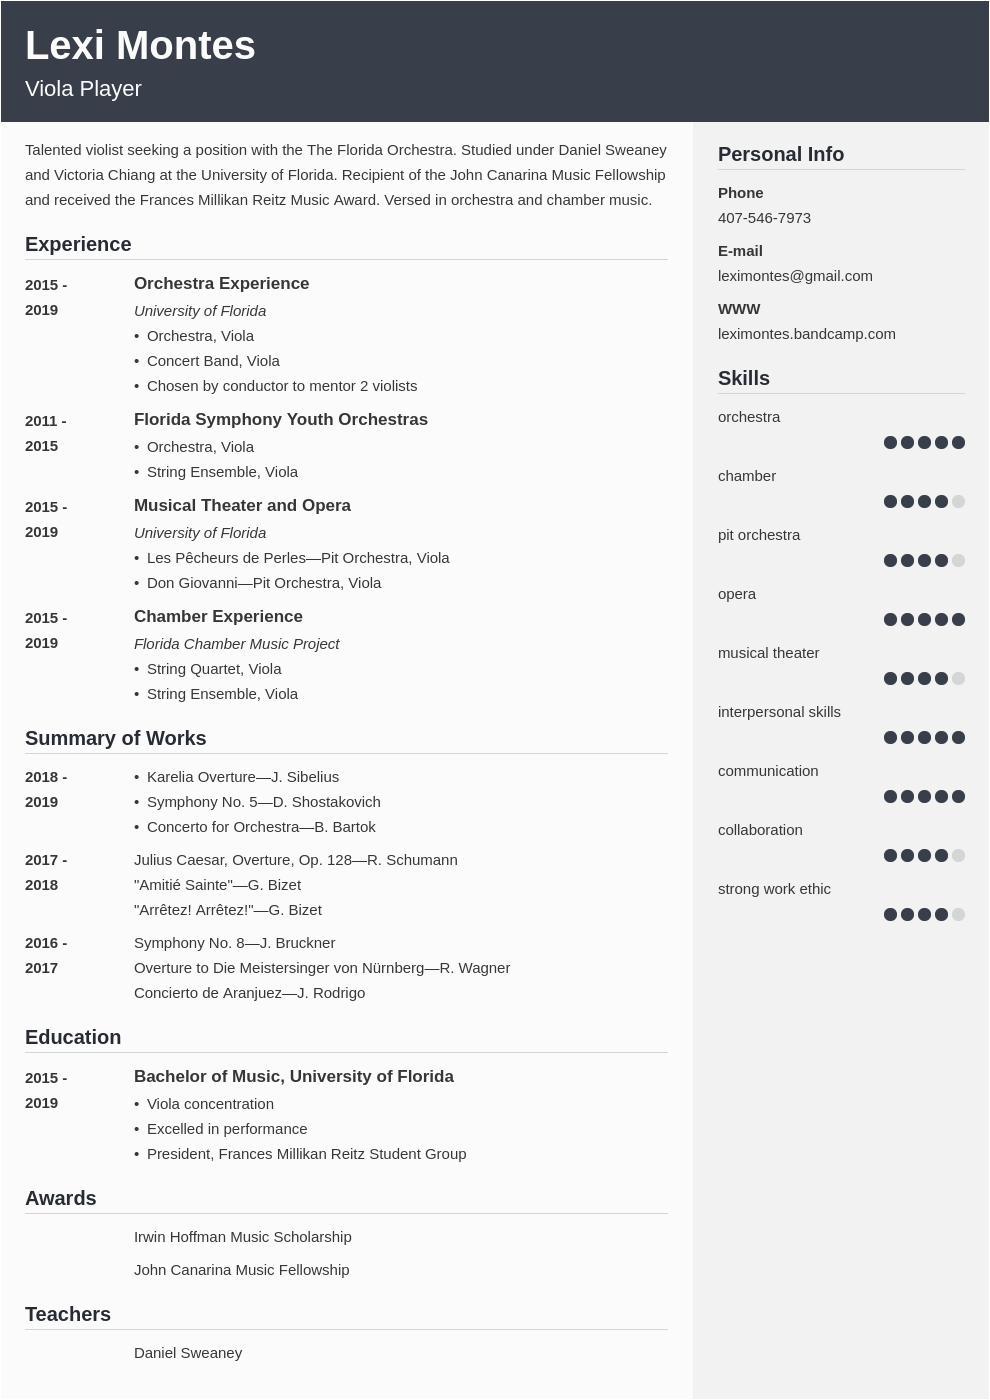 Sample Resume for College Music Application Music Resume Examples for Musicians & College Application